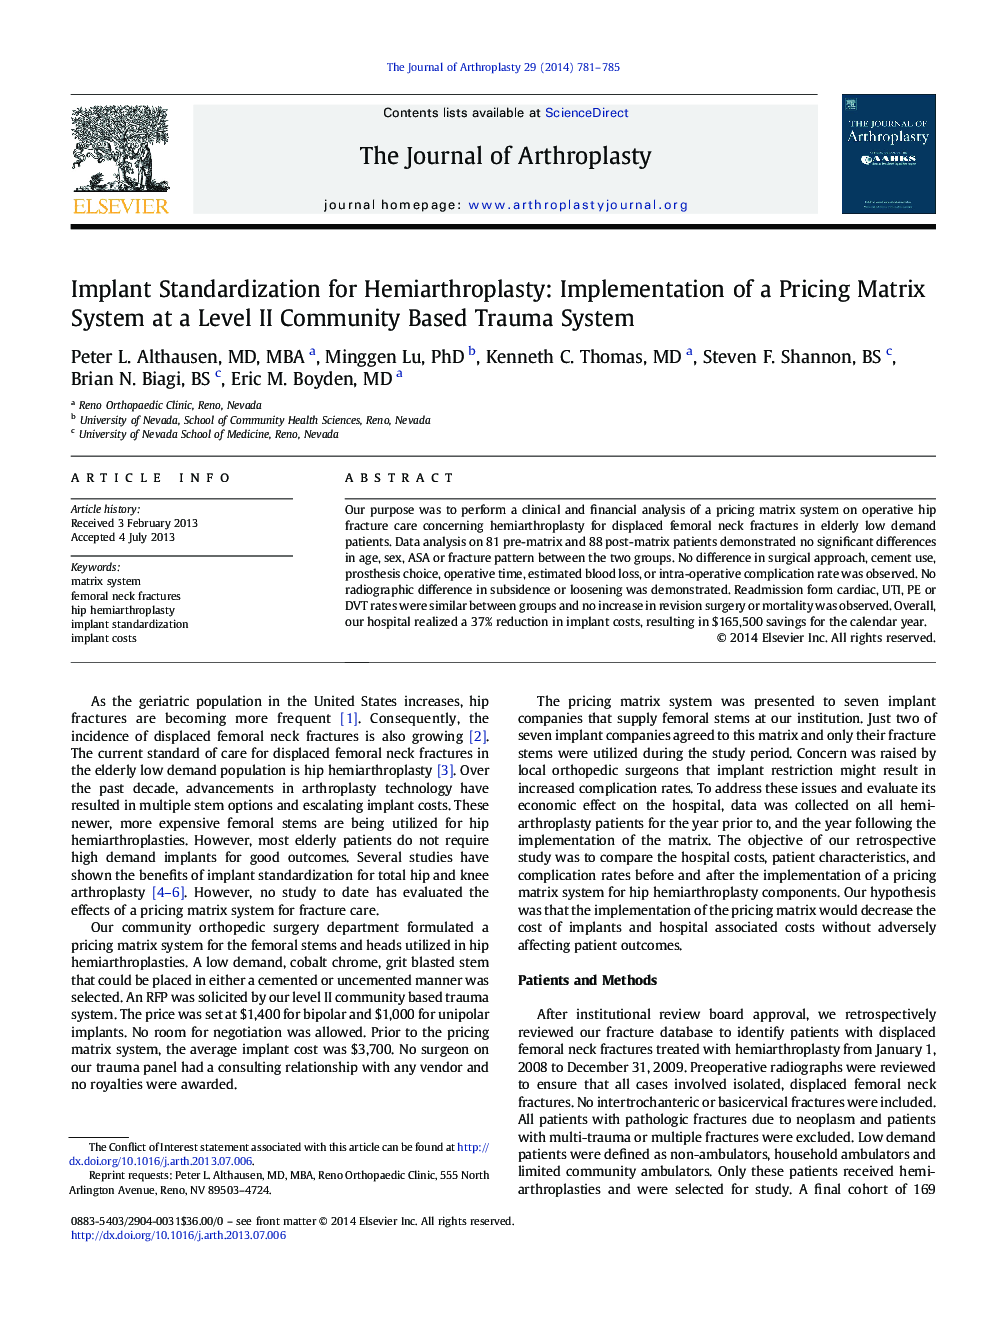 Implant Standardization for Hemiarthroplasty: Implementation of a Pricing Matrix System at a Level II Community Based Trauma System 